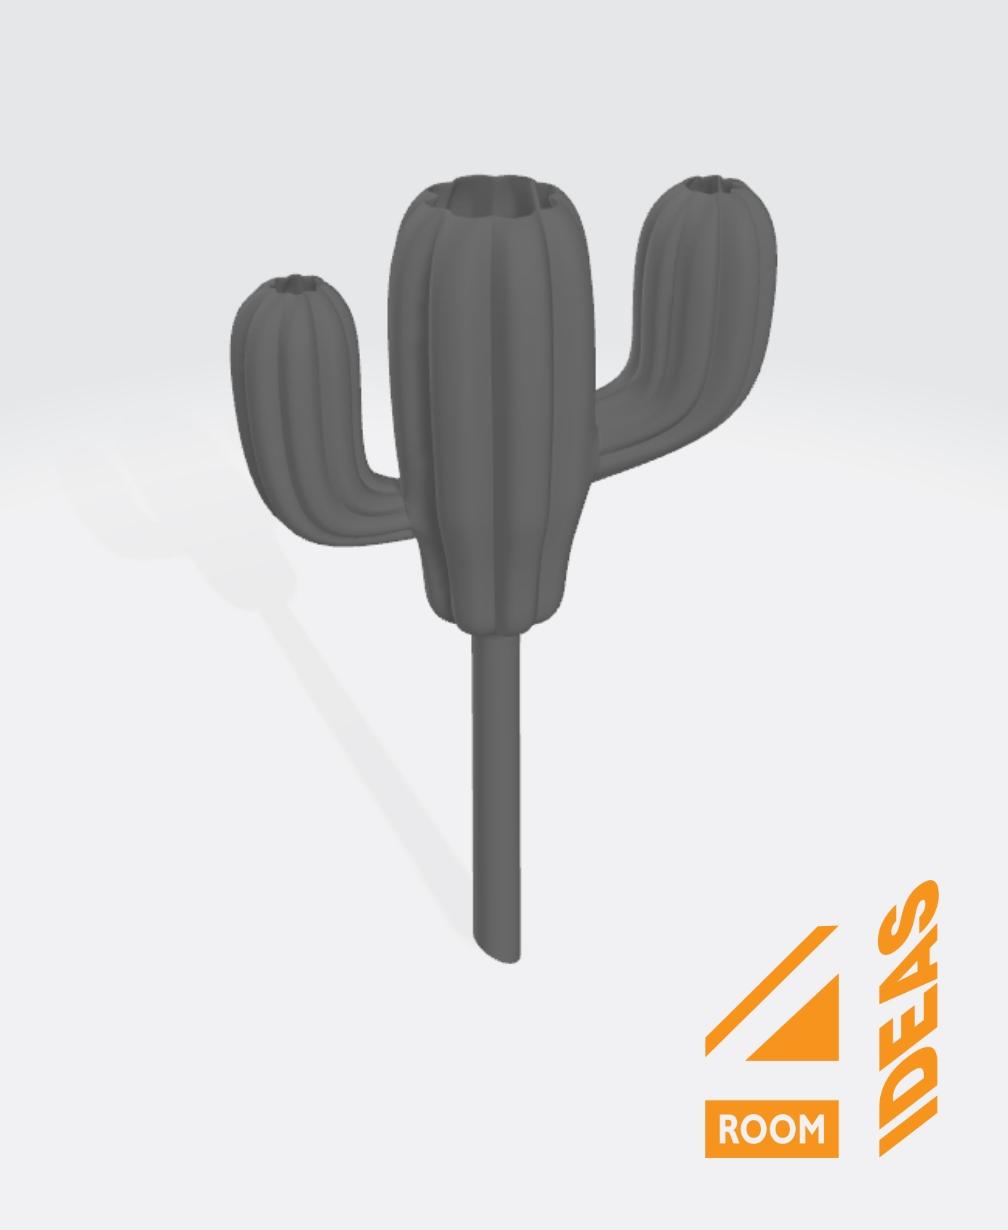 Moss Pole Watering Stake - Cactus 3 3d model